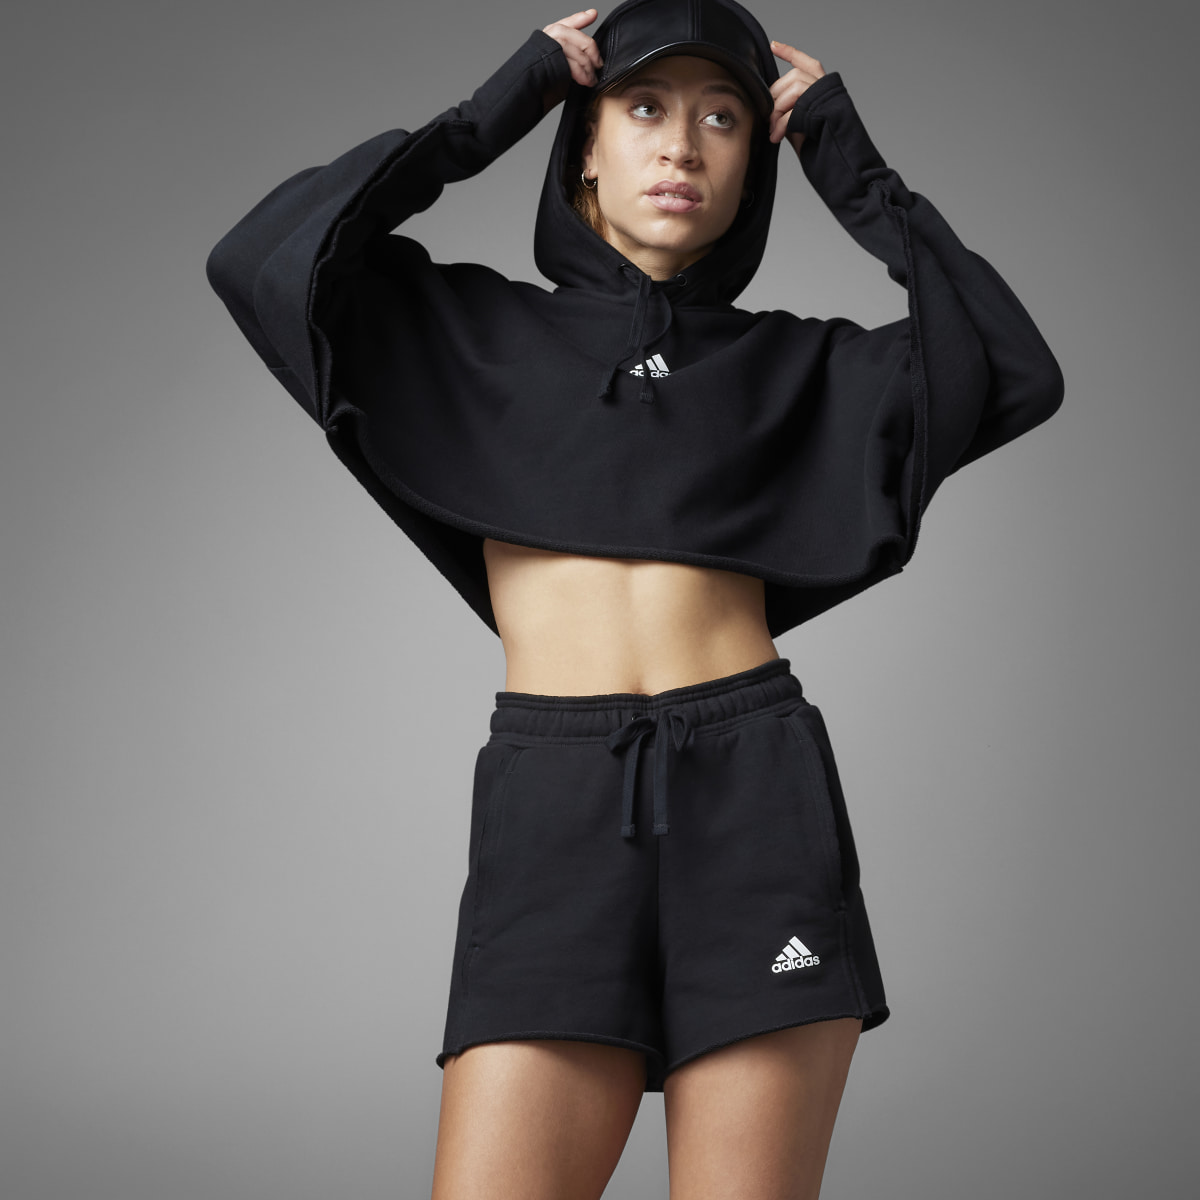 Adidas Collective Power Cropped Hoodie. 5